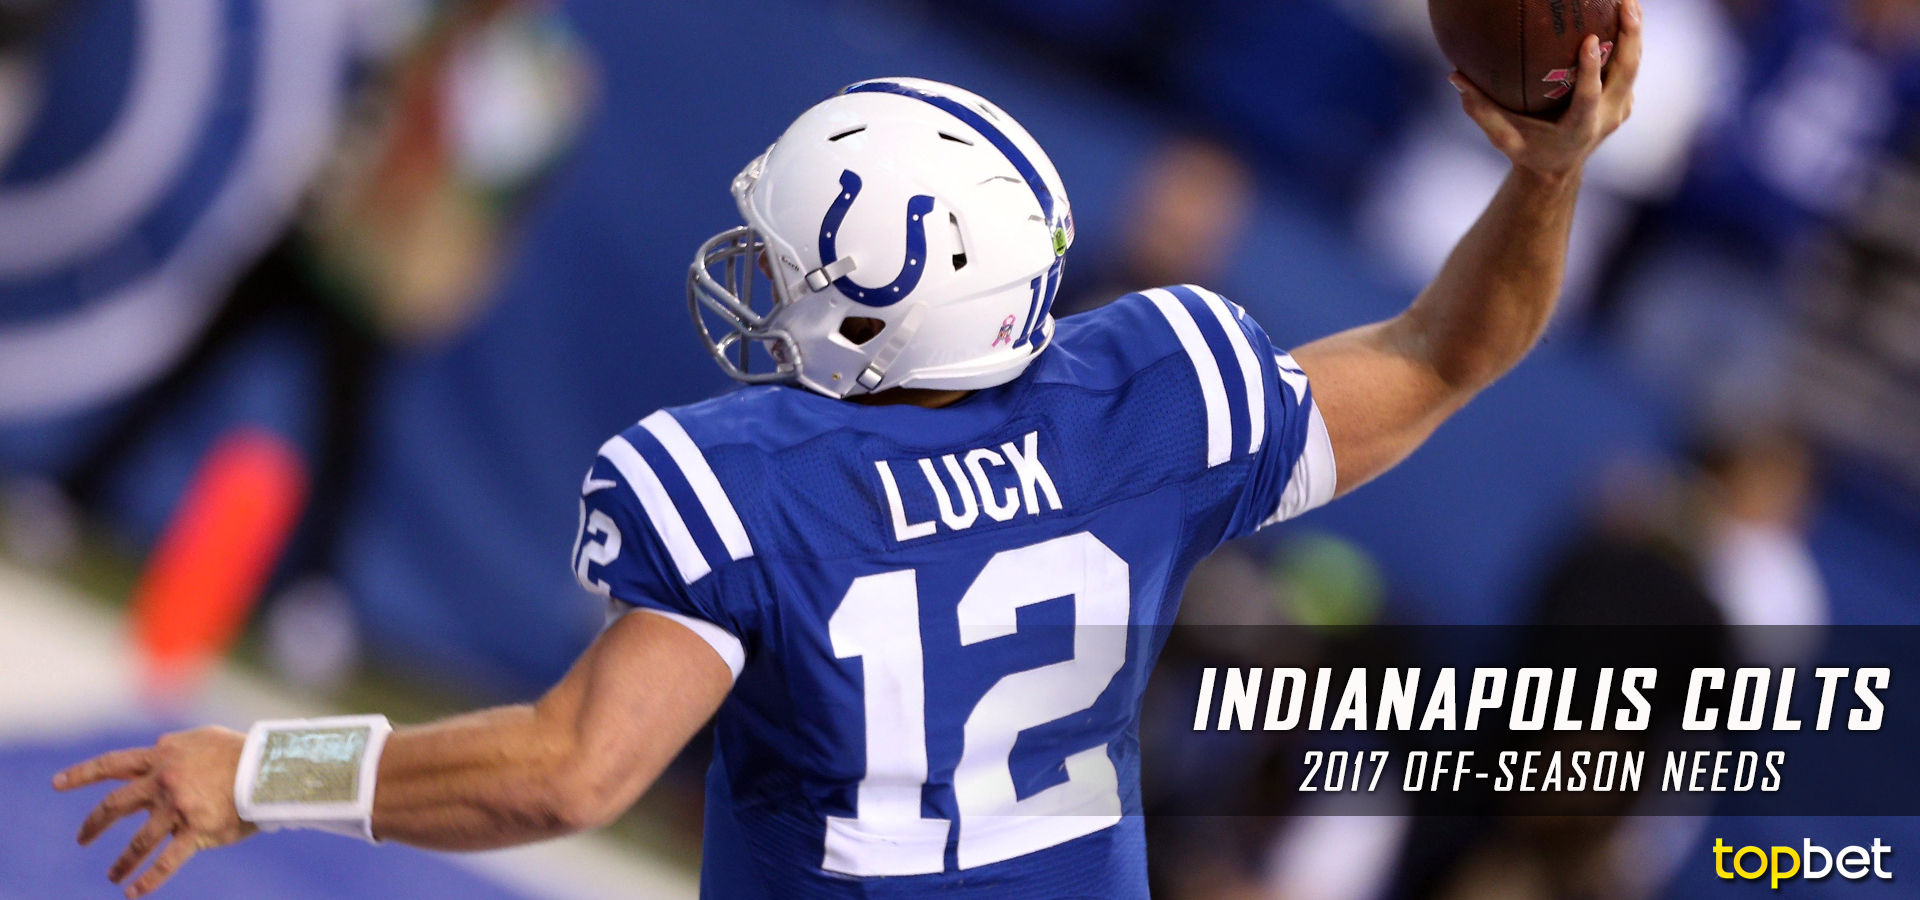 indianapolis-colts-offseason-needs-plans-rumors-2017